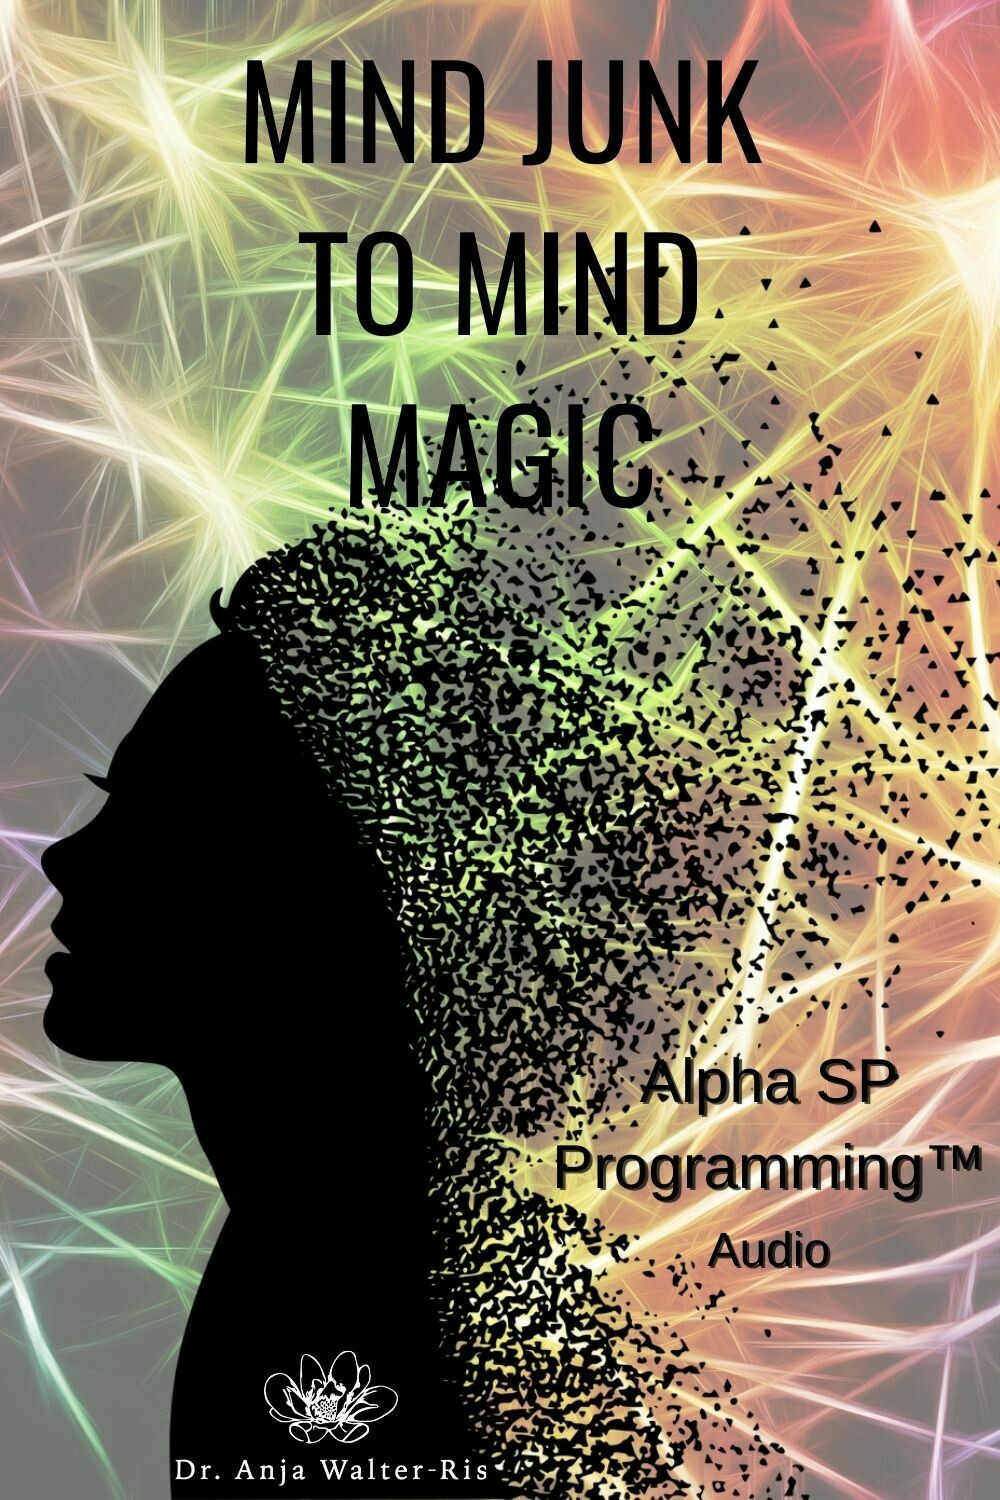 From Mind Junk to Mind Magic